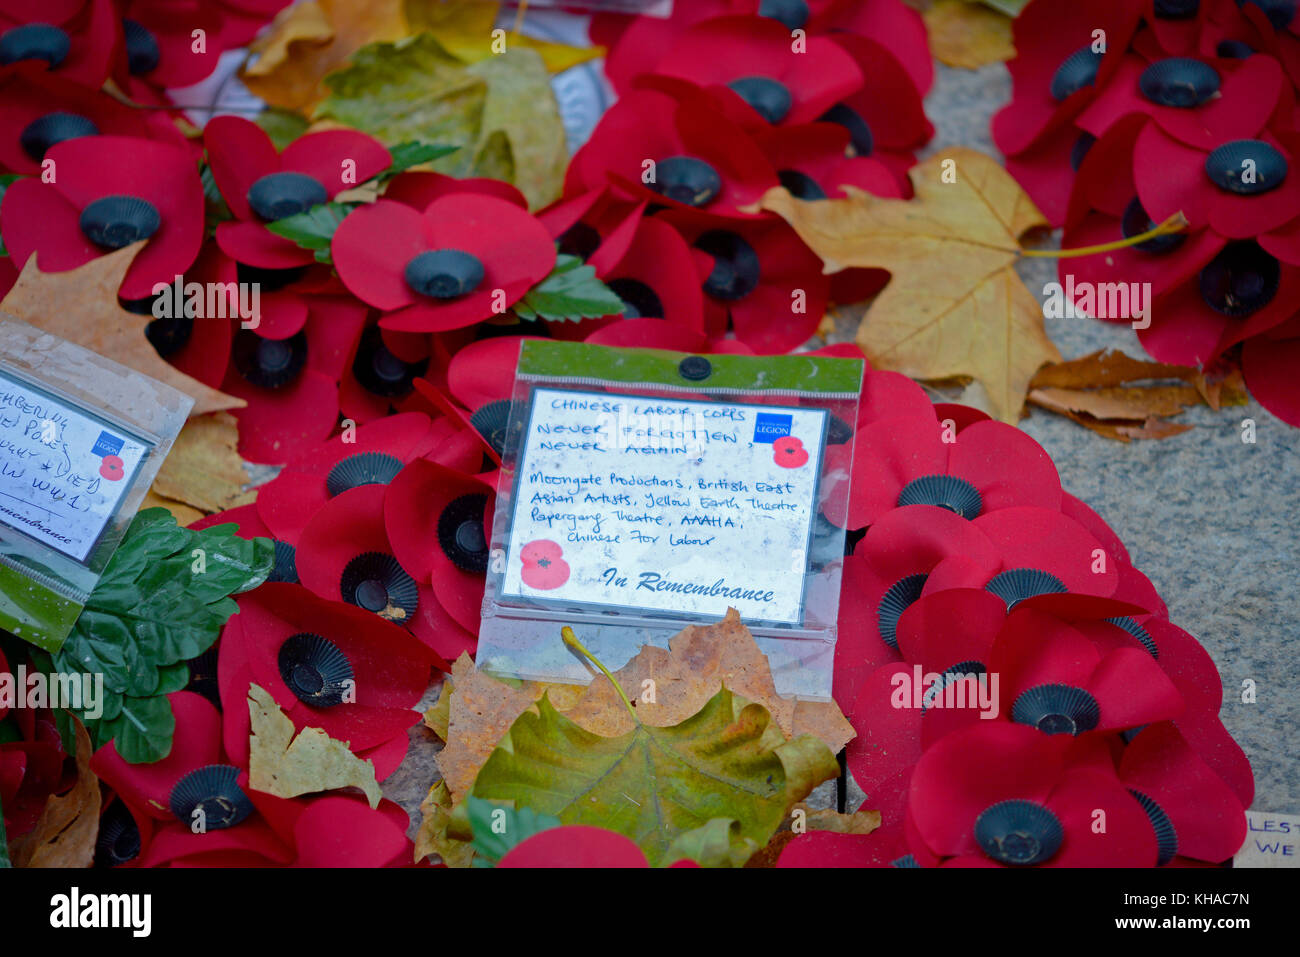 Dedication on poppy wreath by Chinese Labour Corps on the Cenotaph placed on Remembrance Sunday. Moongate productions, British East Asian Artists Stock Photo